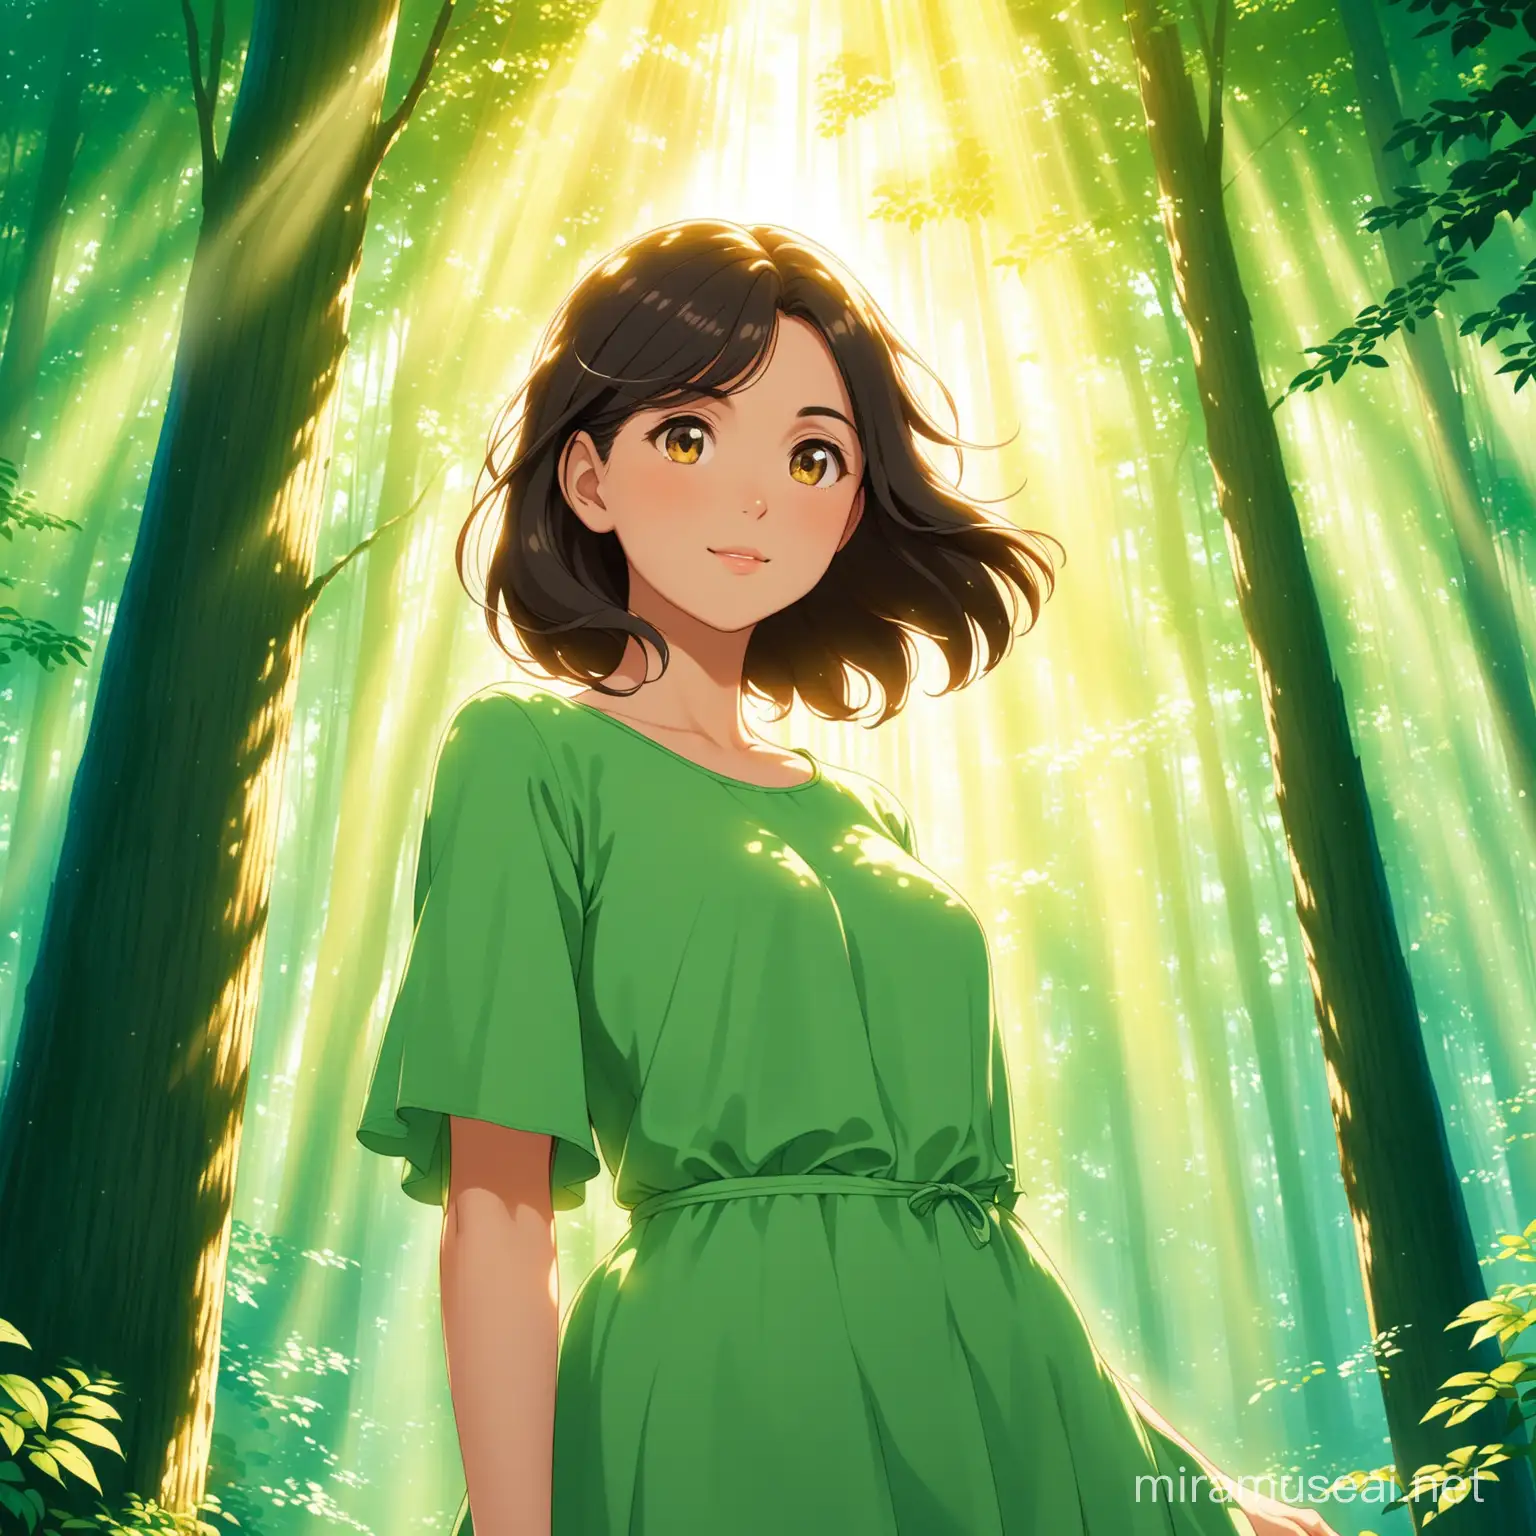 in the style of ghibli studios a very attractive woman posing, with a lush forest in the background with rays on sunshine shining through the tree tops